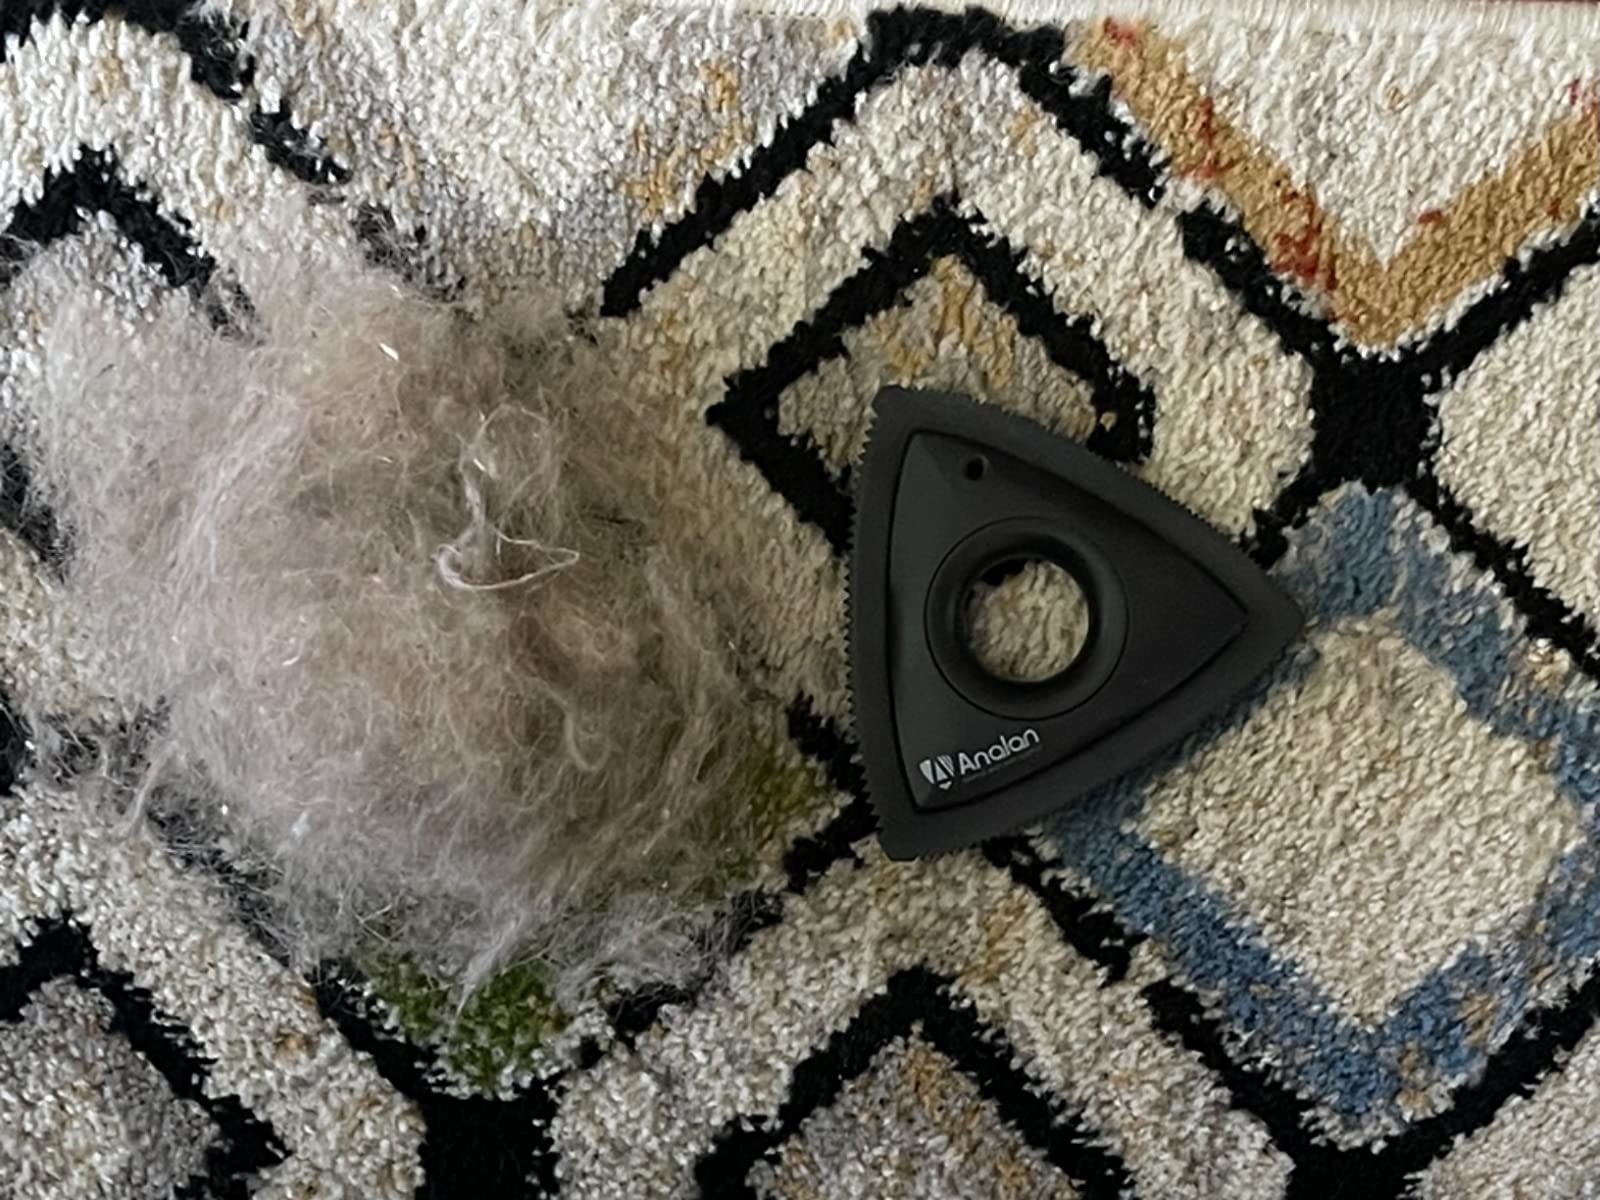 pile of gray and white fur on a carpet next the the black tool